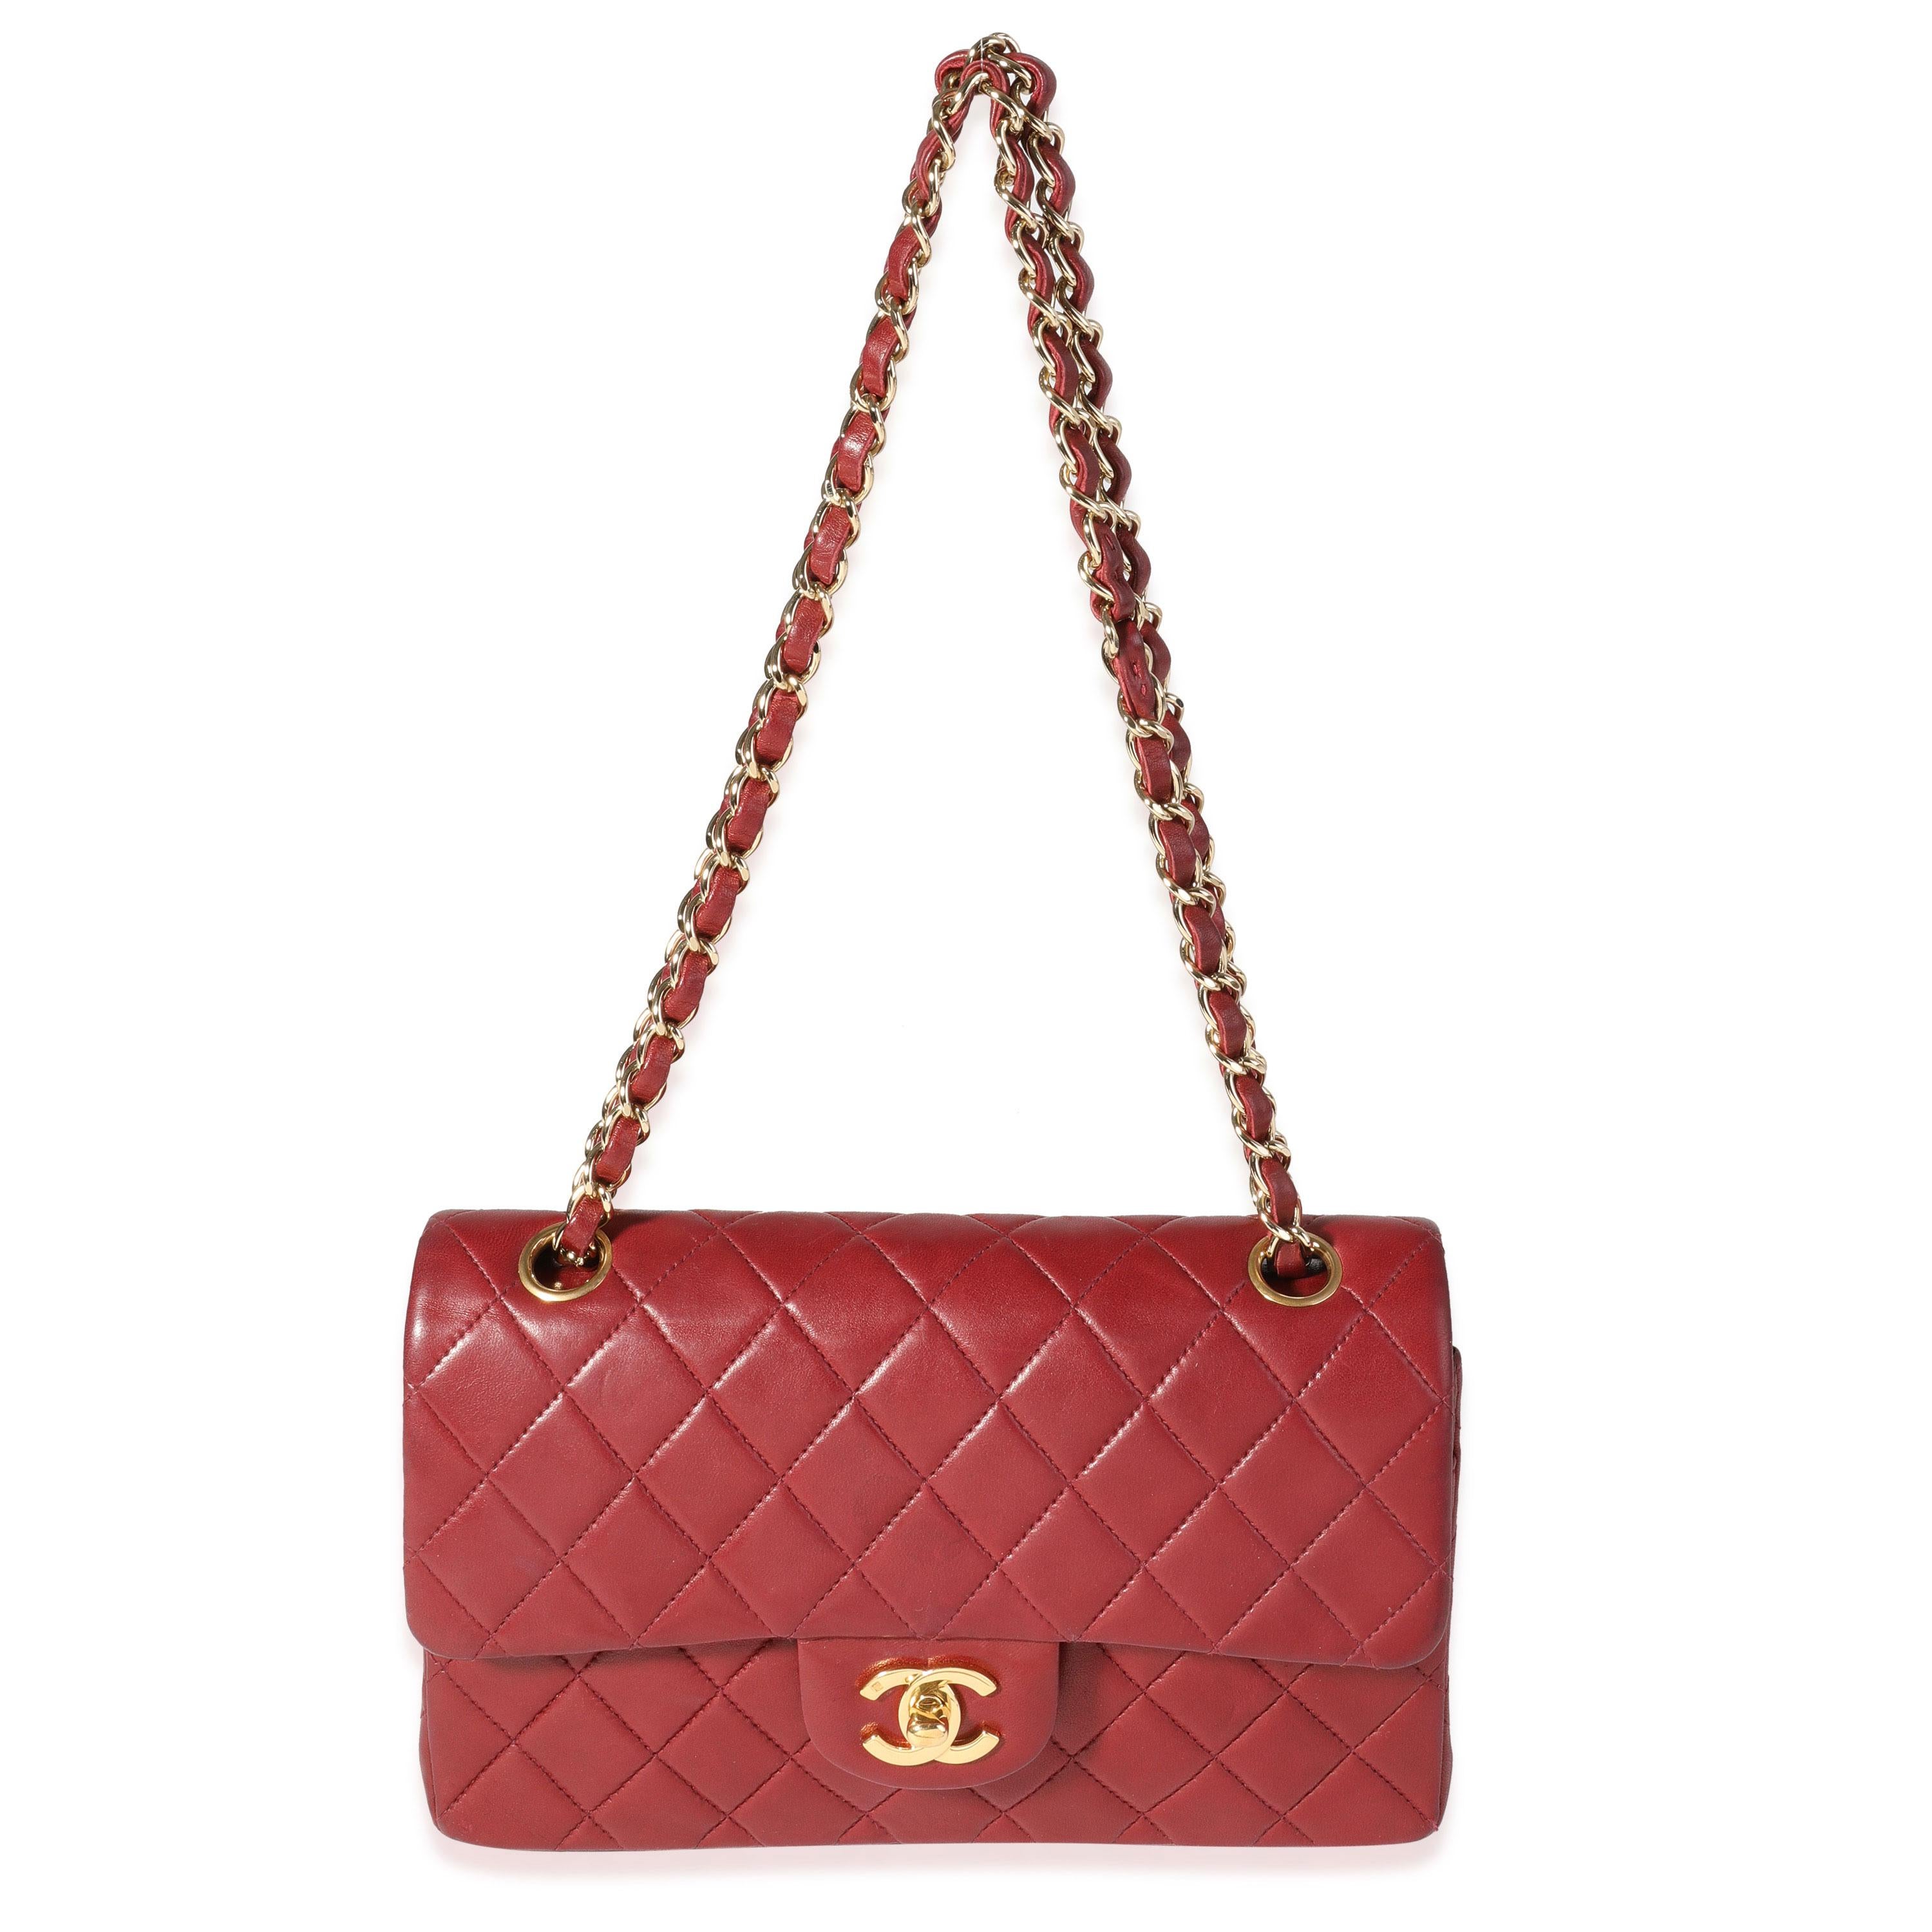 Listing Title: Chanel Burgundy Quilted Lambskin Small Classic Double Flap Bag
SKU: 120585
MSRP: 8200.00
Condition: Pre-owned 
Handbag Condition: Good
Condition Comments: Good Condition. Scuffing to corners, and throughout exterior. Discoloration to